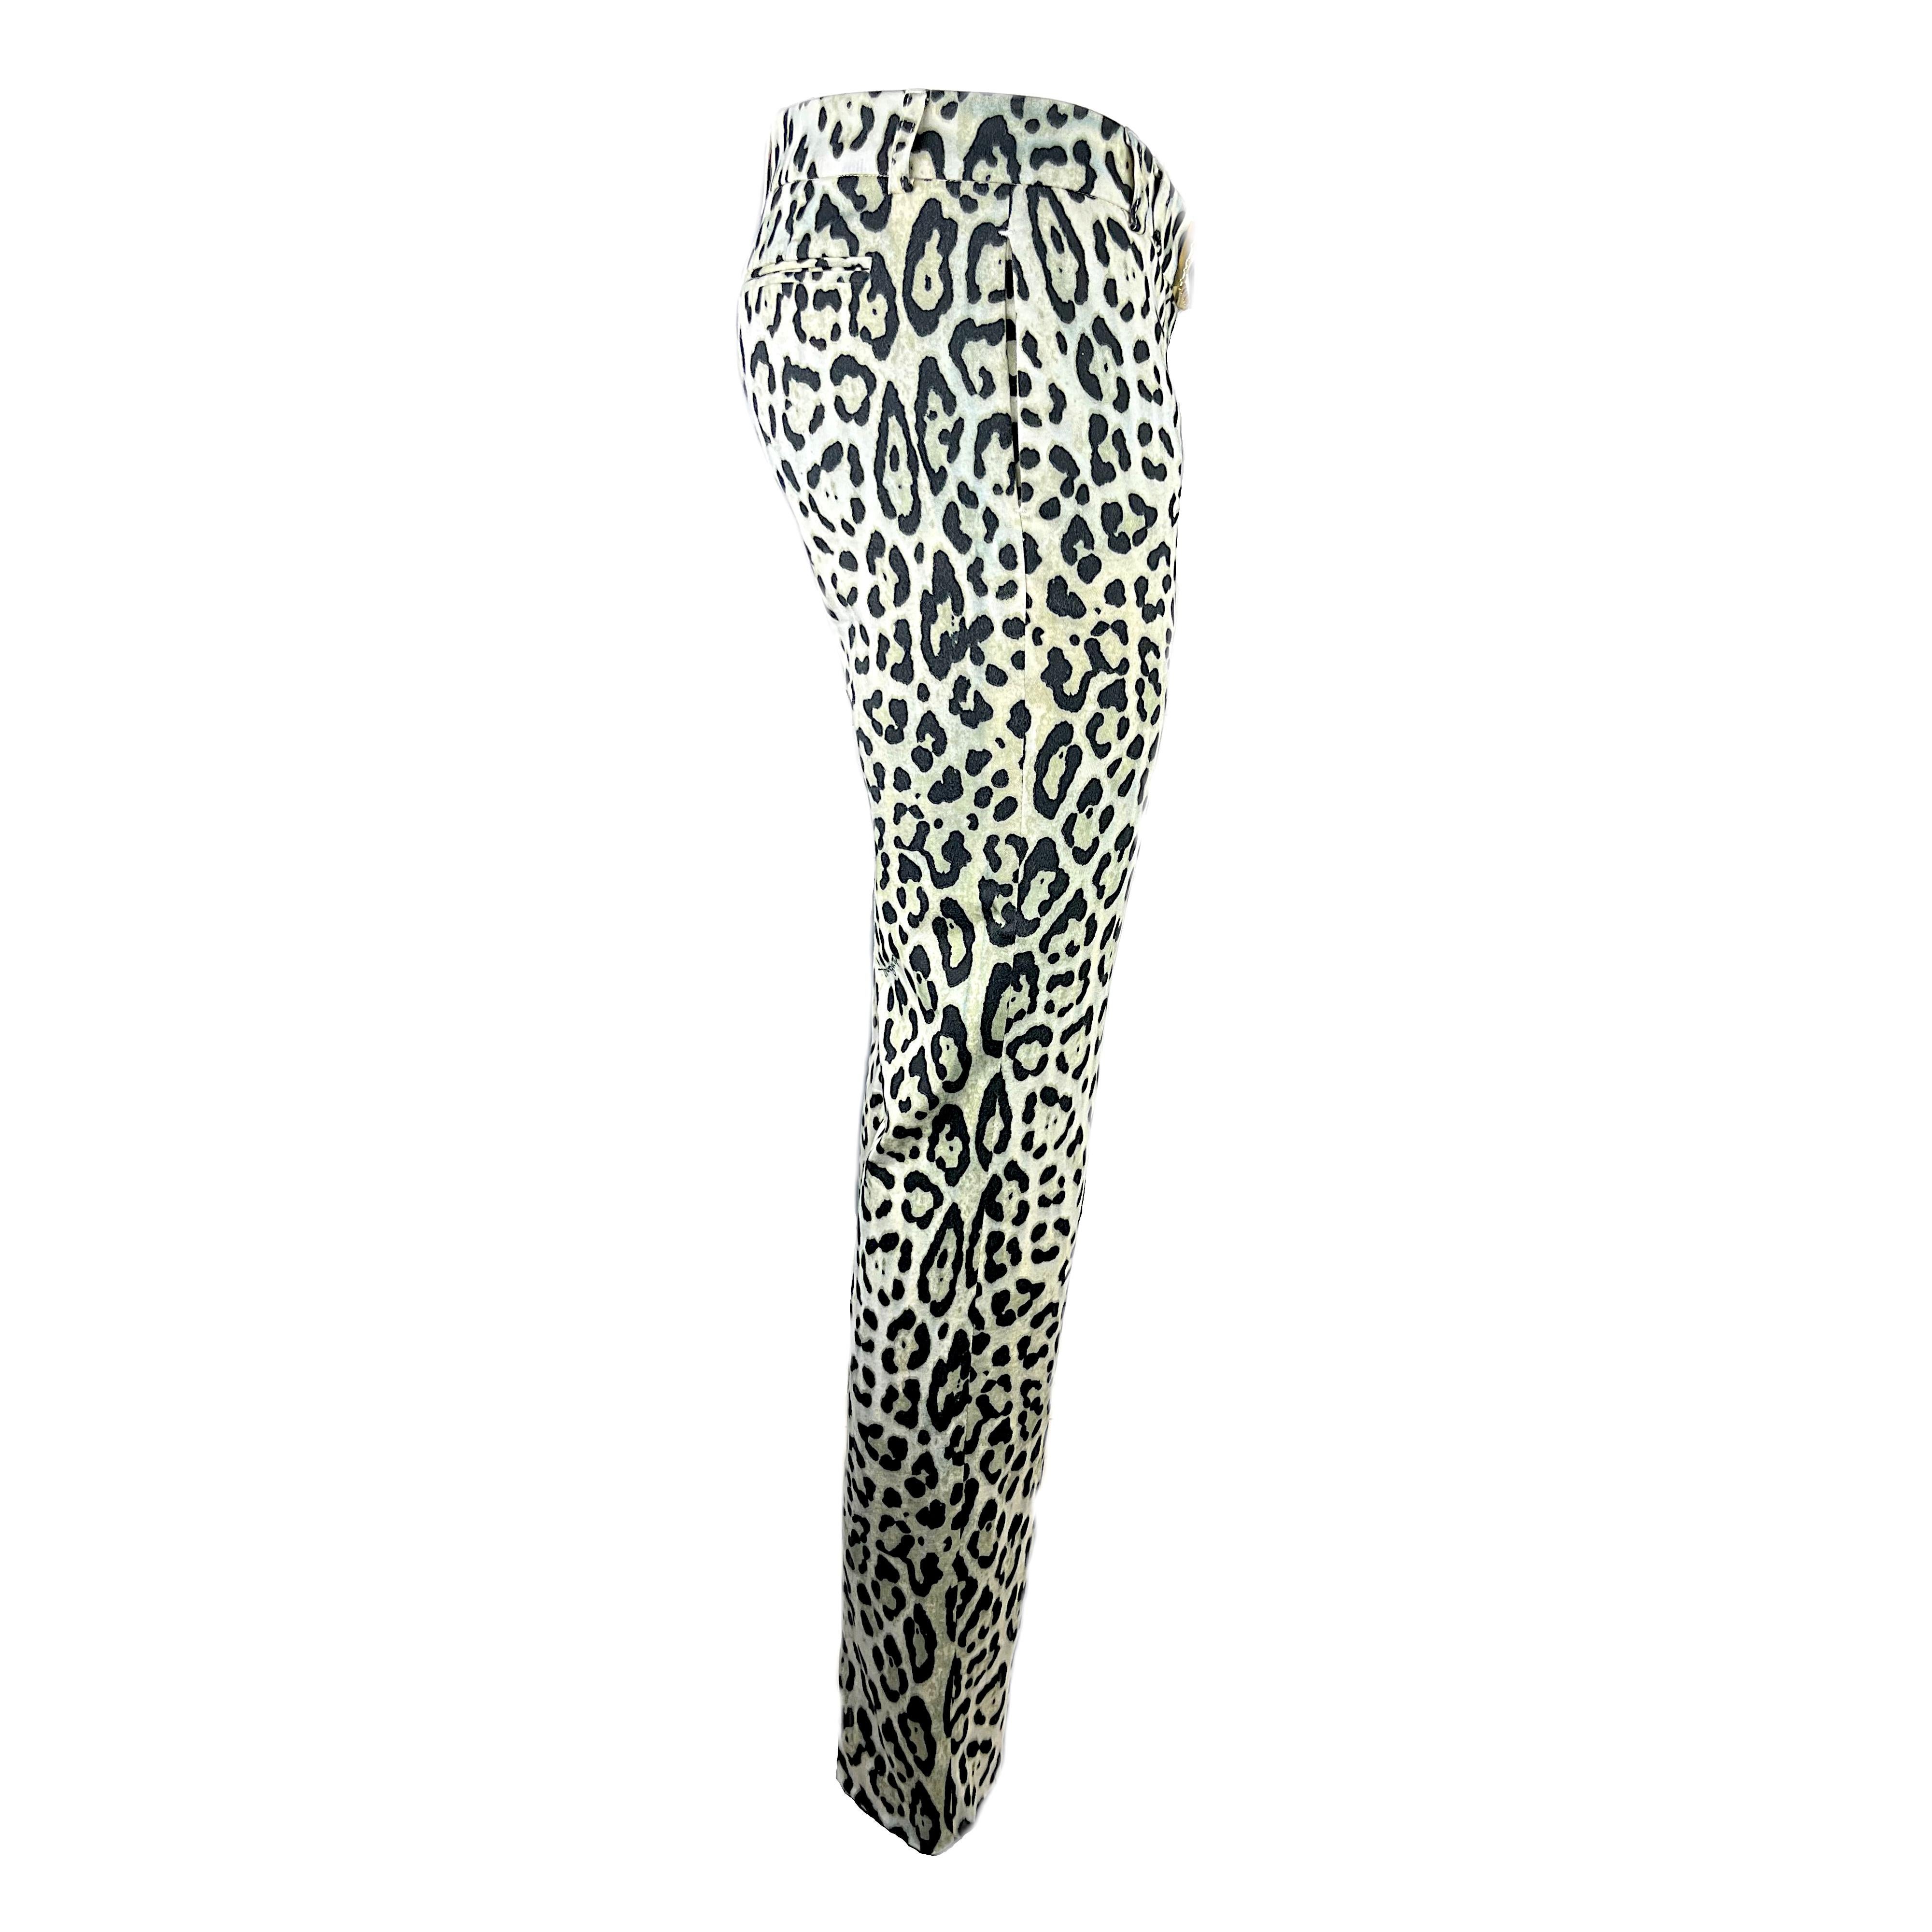 These pants are made of an iconic symbol of Roberto Cavalli's design: the white leopard print, which along with the zebra print represents one of his most popular signatures. 
The pants feature 2 front pockets and 2 rear pockets, a zip closure